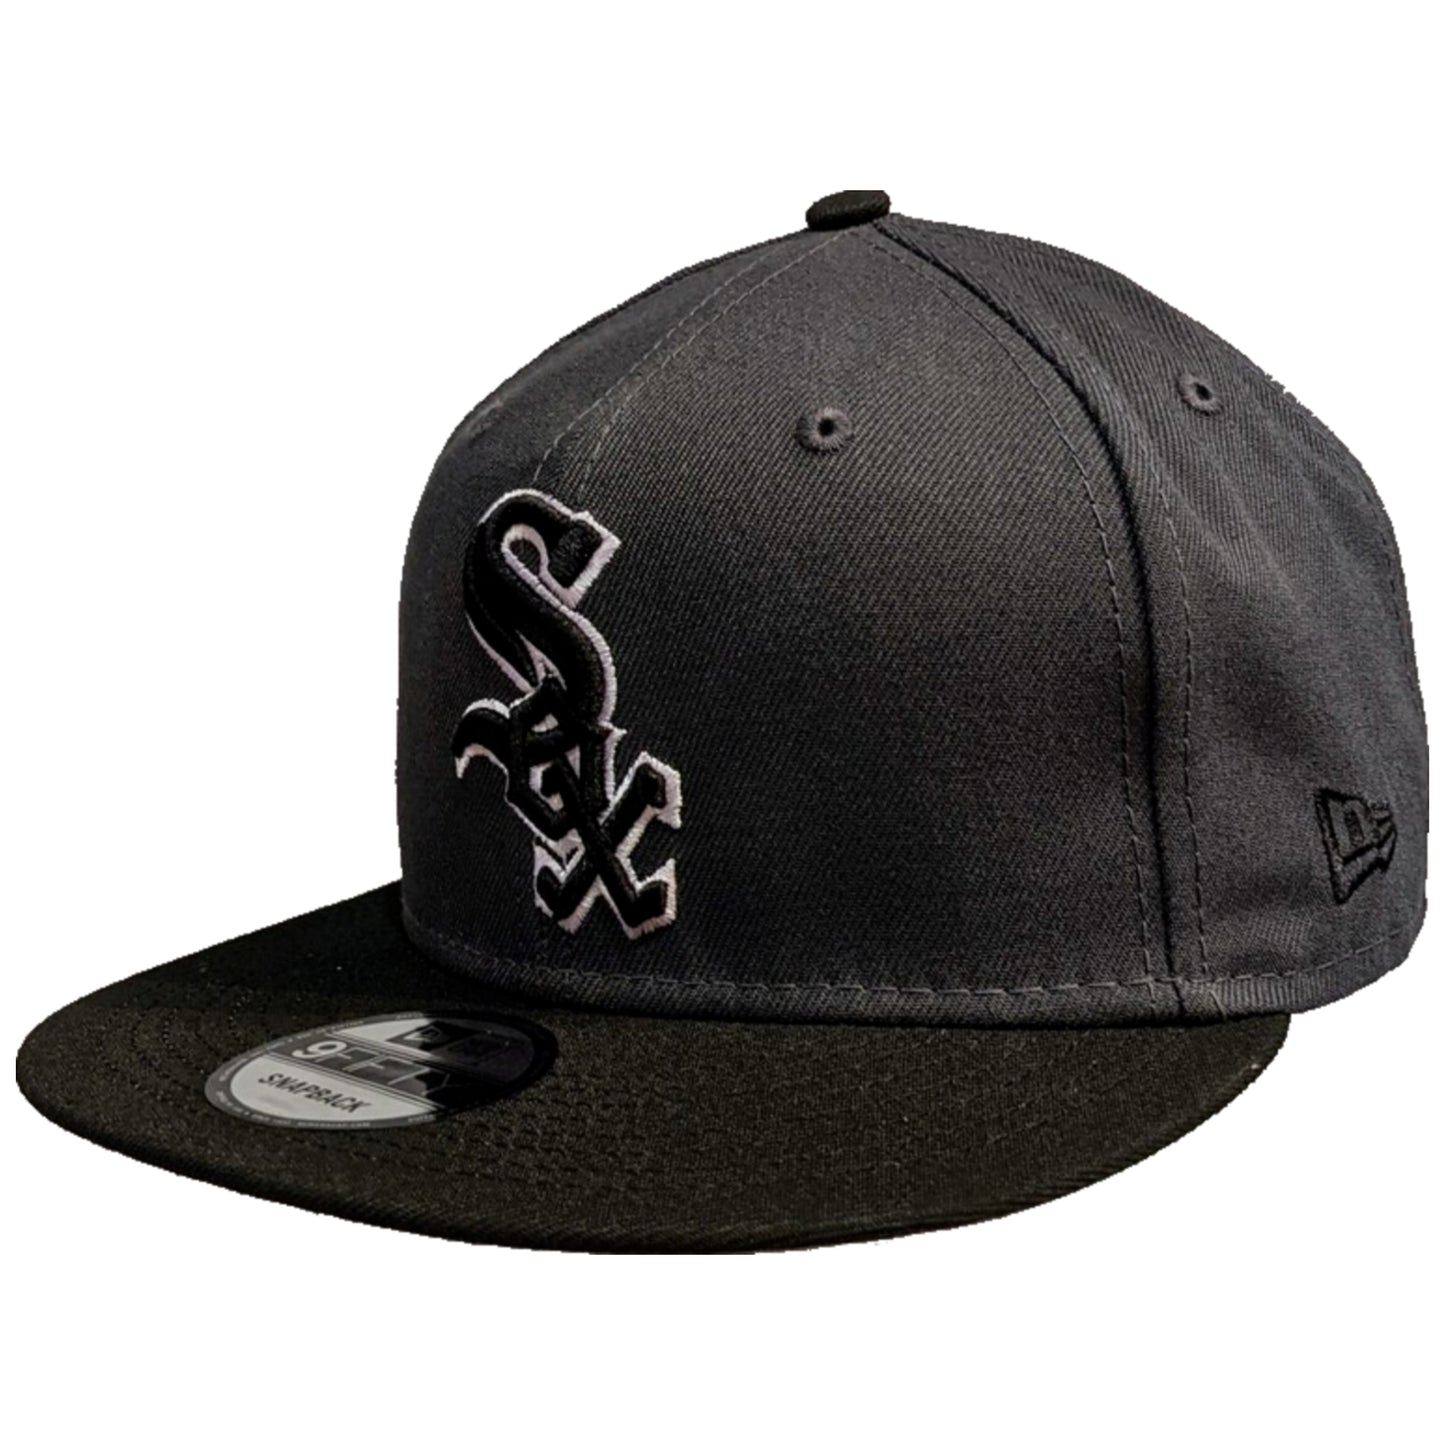 Mens Chicago White Sox New Era Graphite and Black 95th Anniversary Side Patch 9FIFTY Snapback Hat